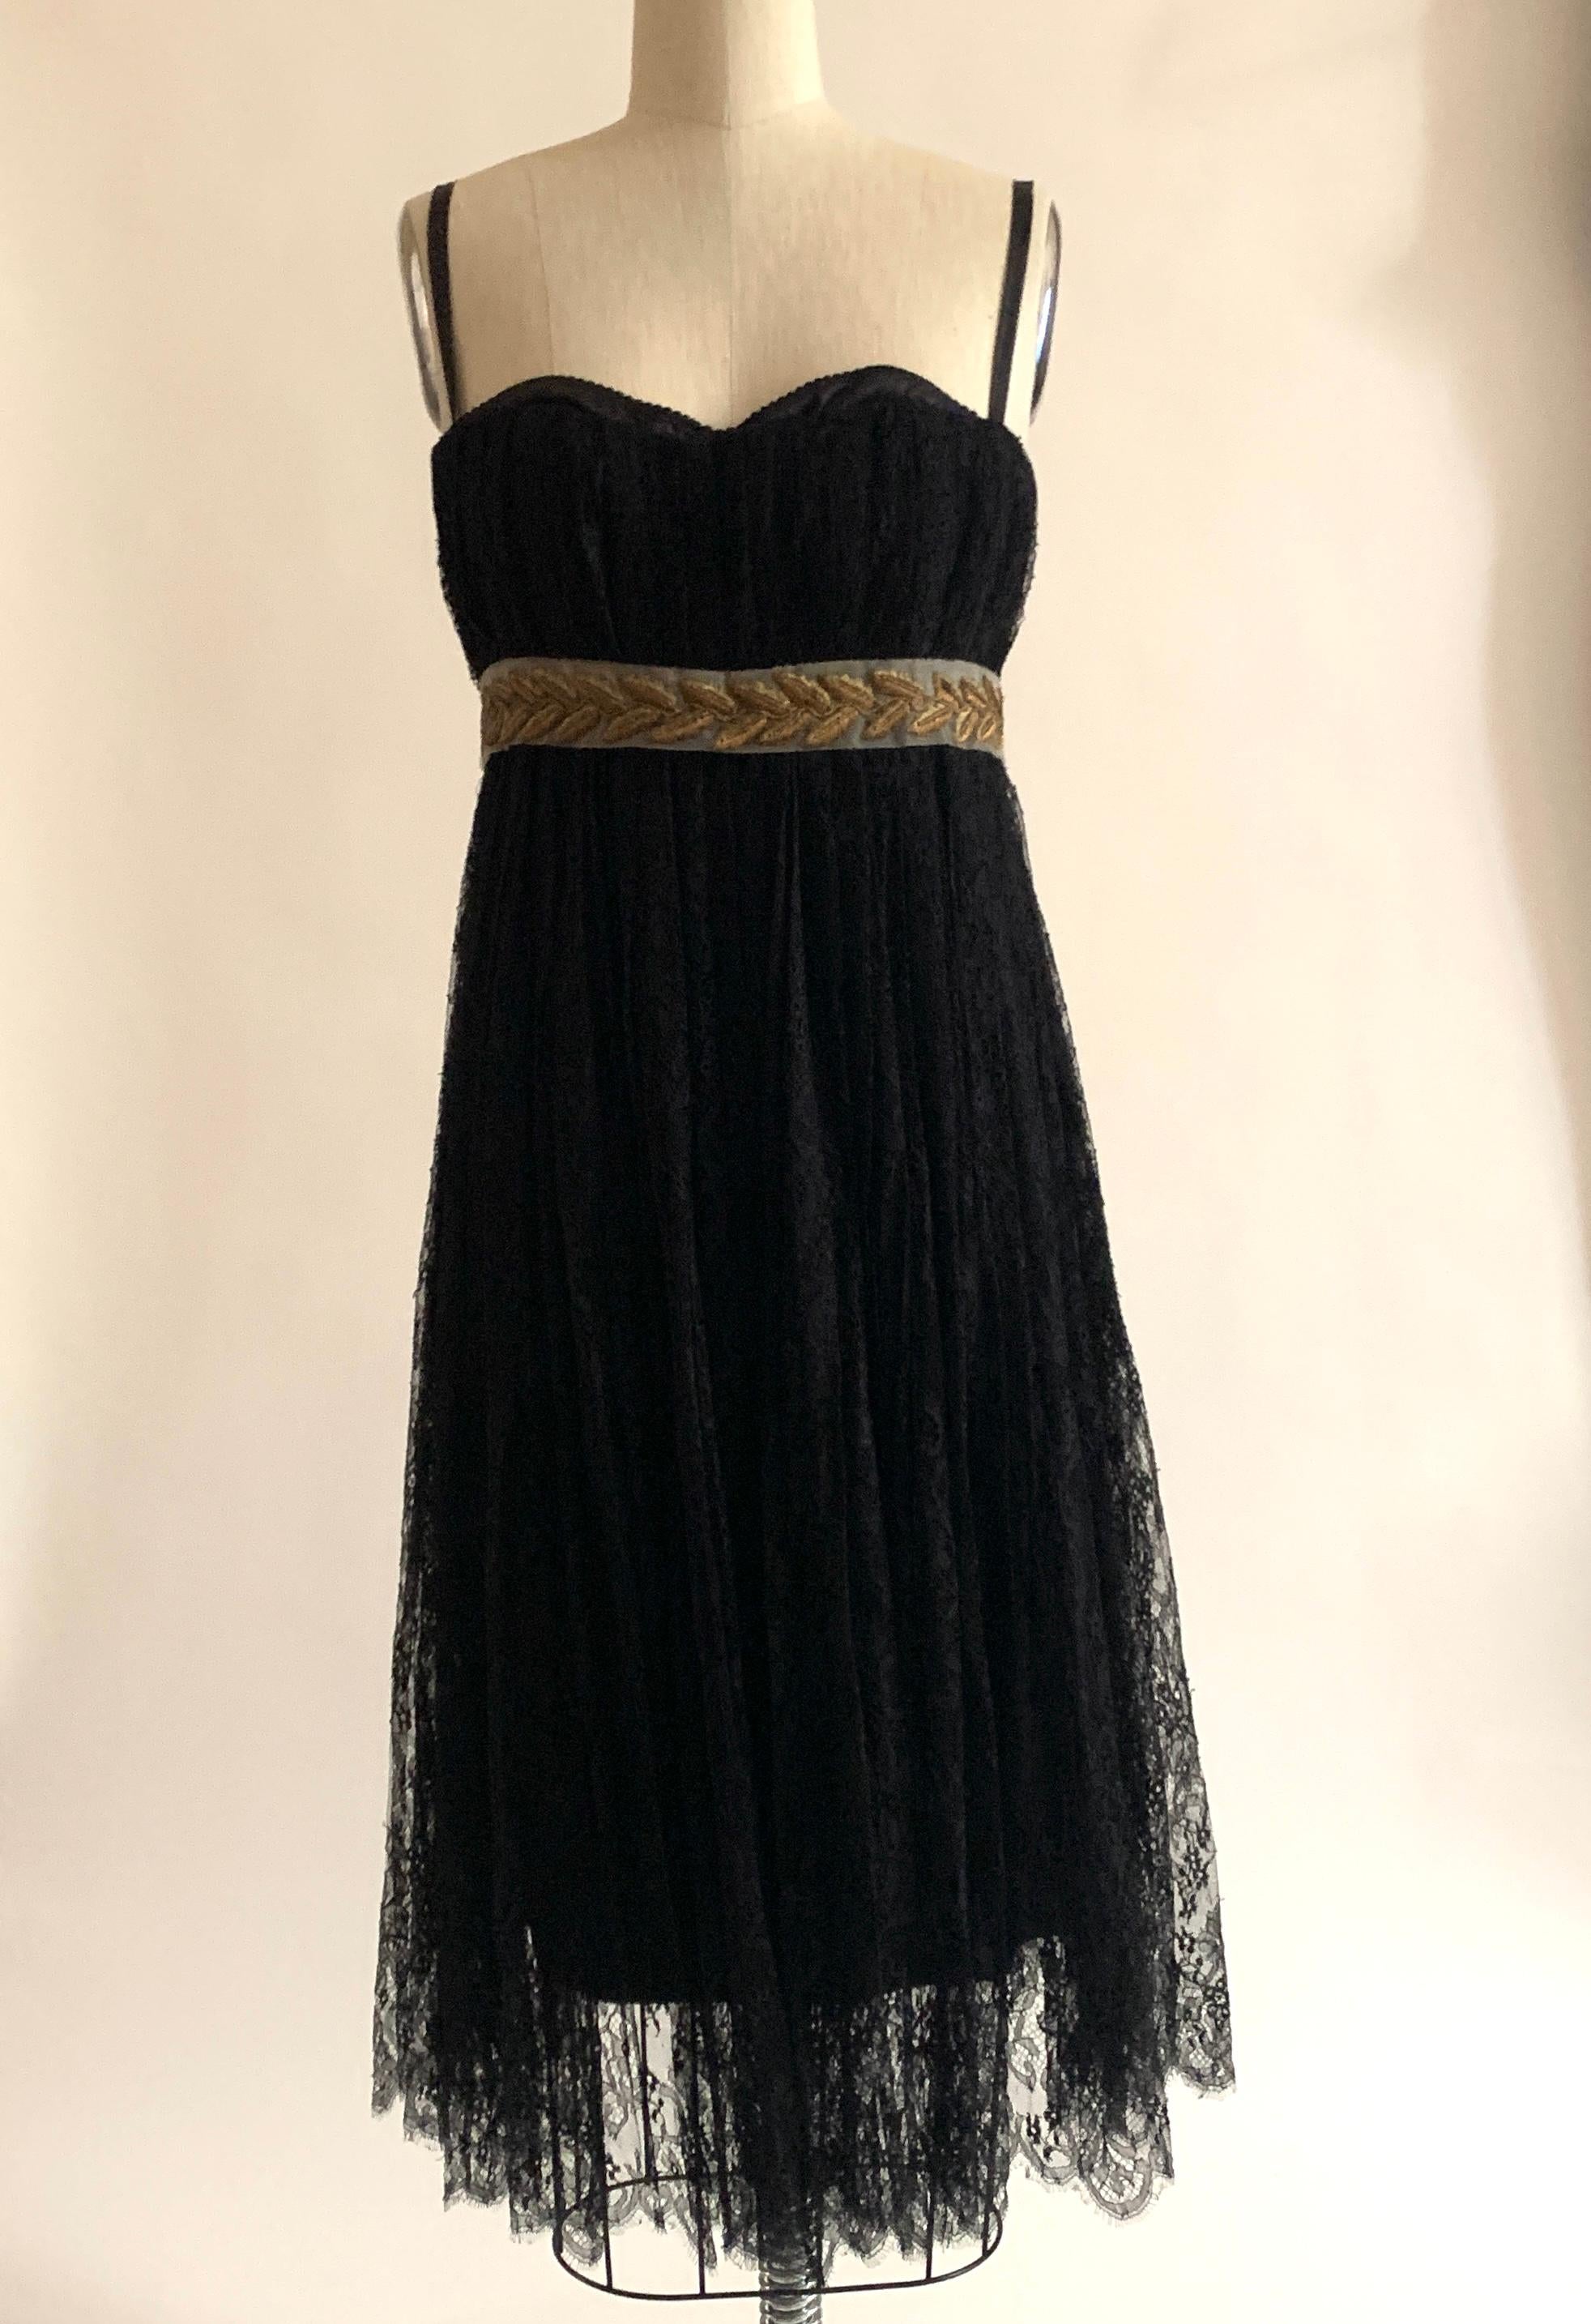 Dolce and Gabbana black lace dress with band below bust featuring gold laurel embroidery. Slightly peekaboo black built in bra (a signature D&G touch) and built in corset at top. Adjustable straps. Double back zip, one at corset and one at lining,